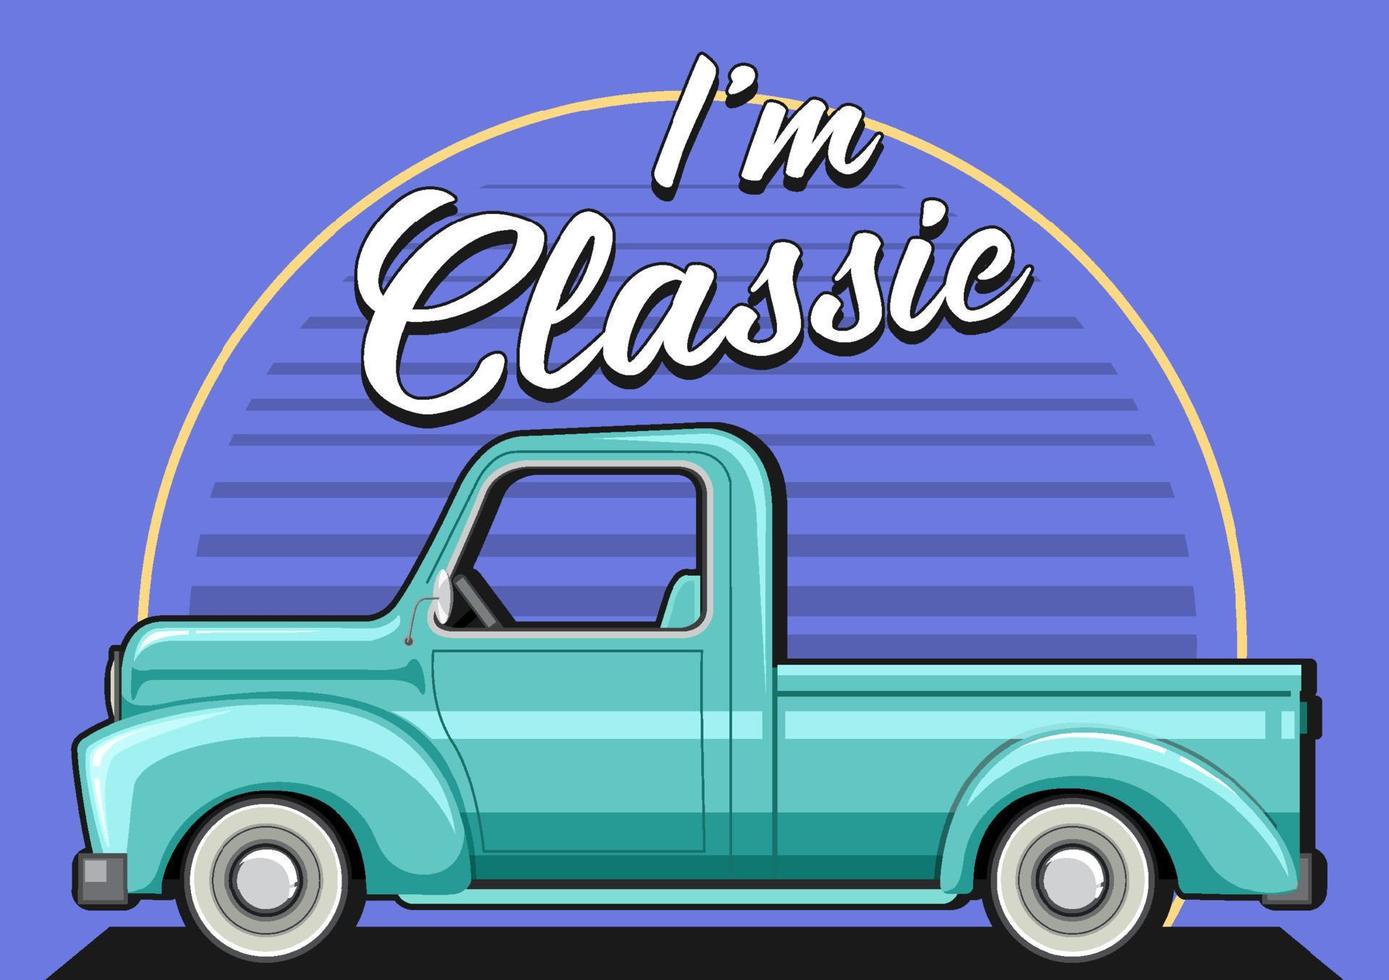 The classic car concept with old truck car vector